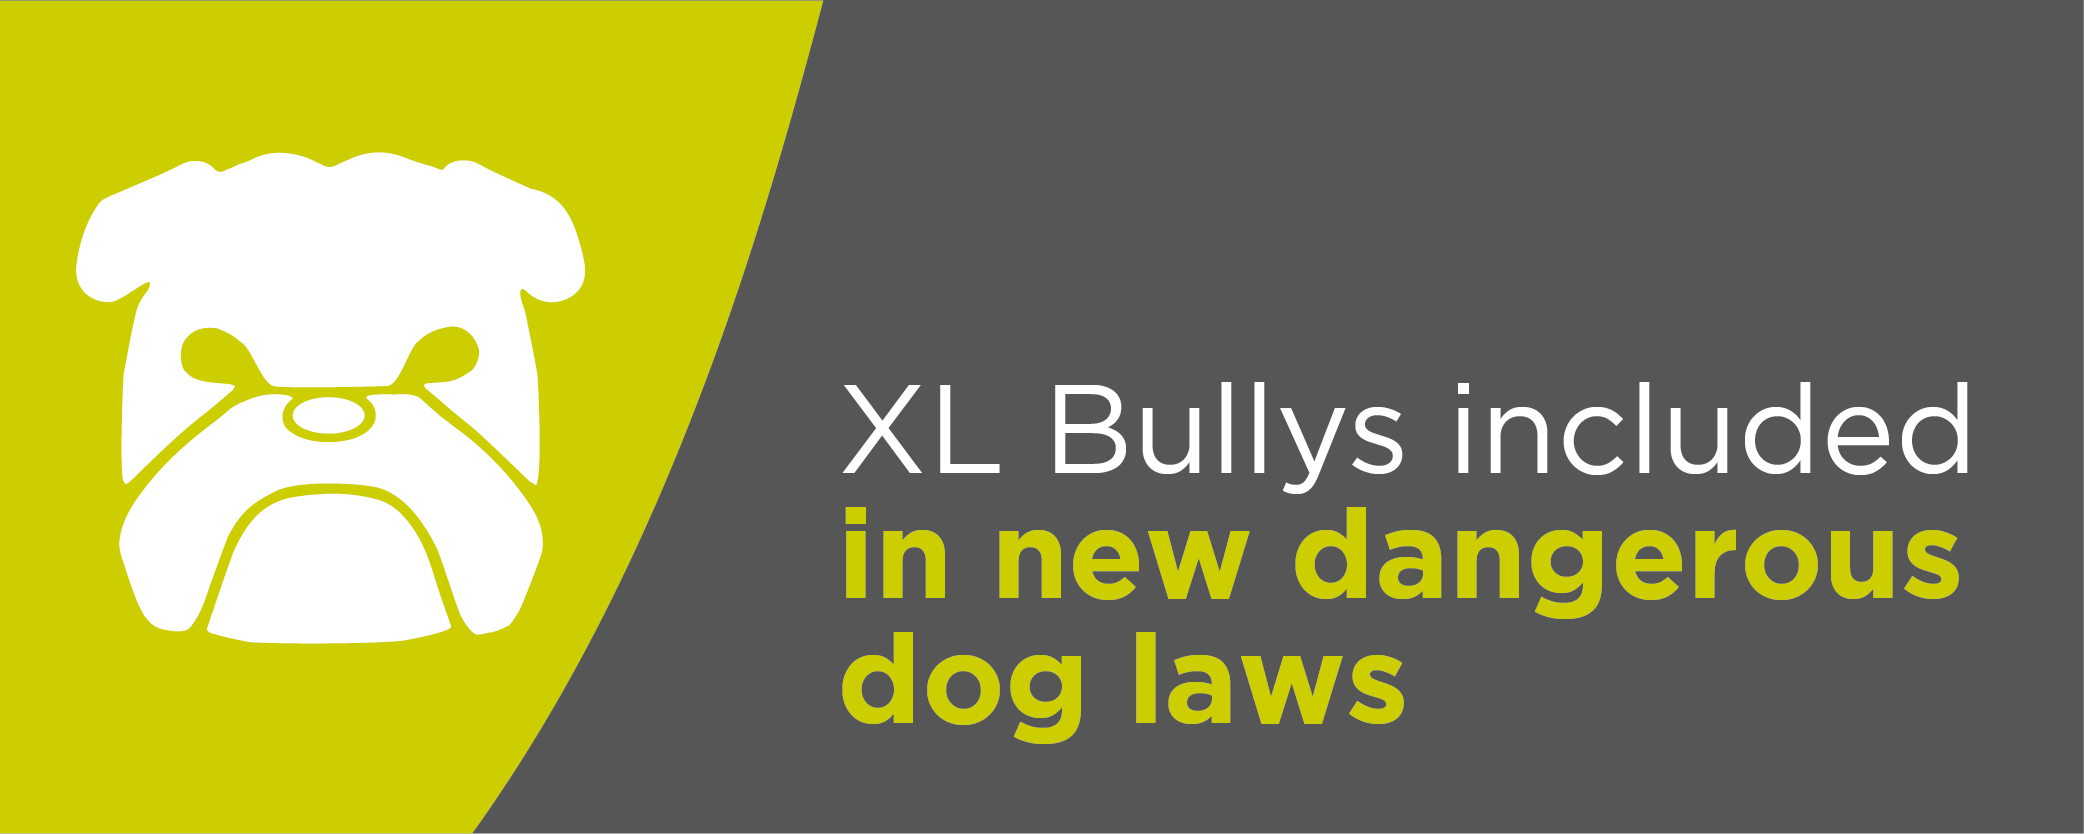 XL Bullys included in new dangerous dog laws 